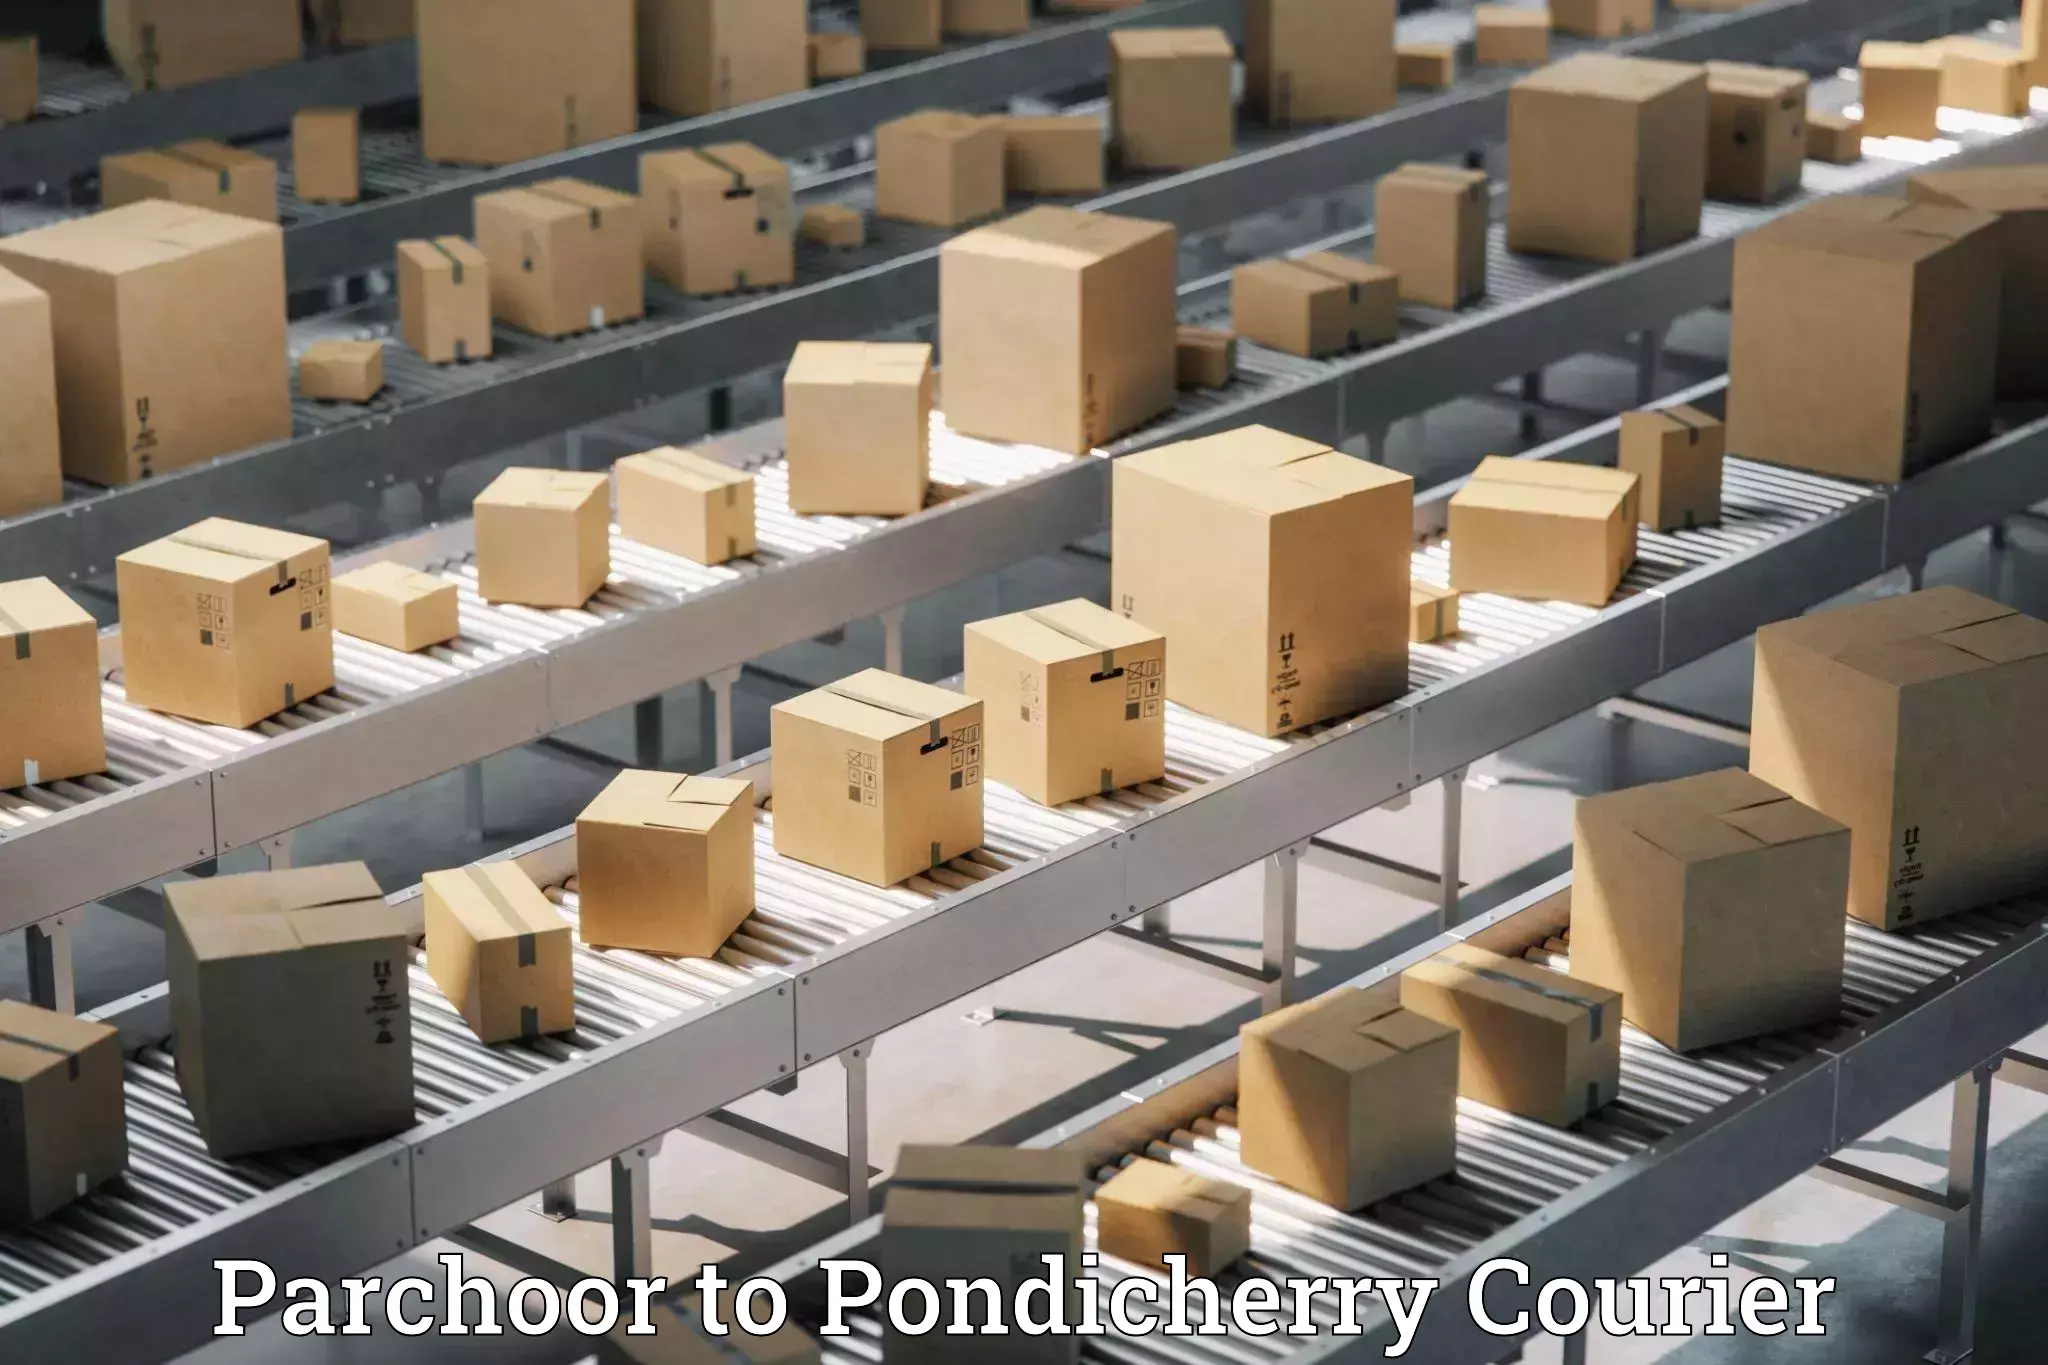 State-of-the-art courier technology Parchoor to Pondicherry University